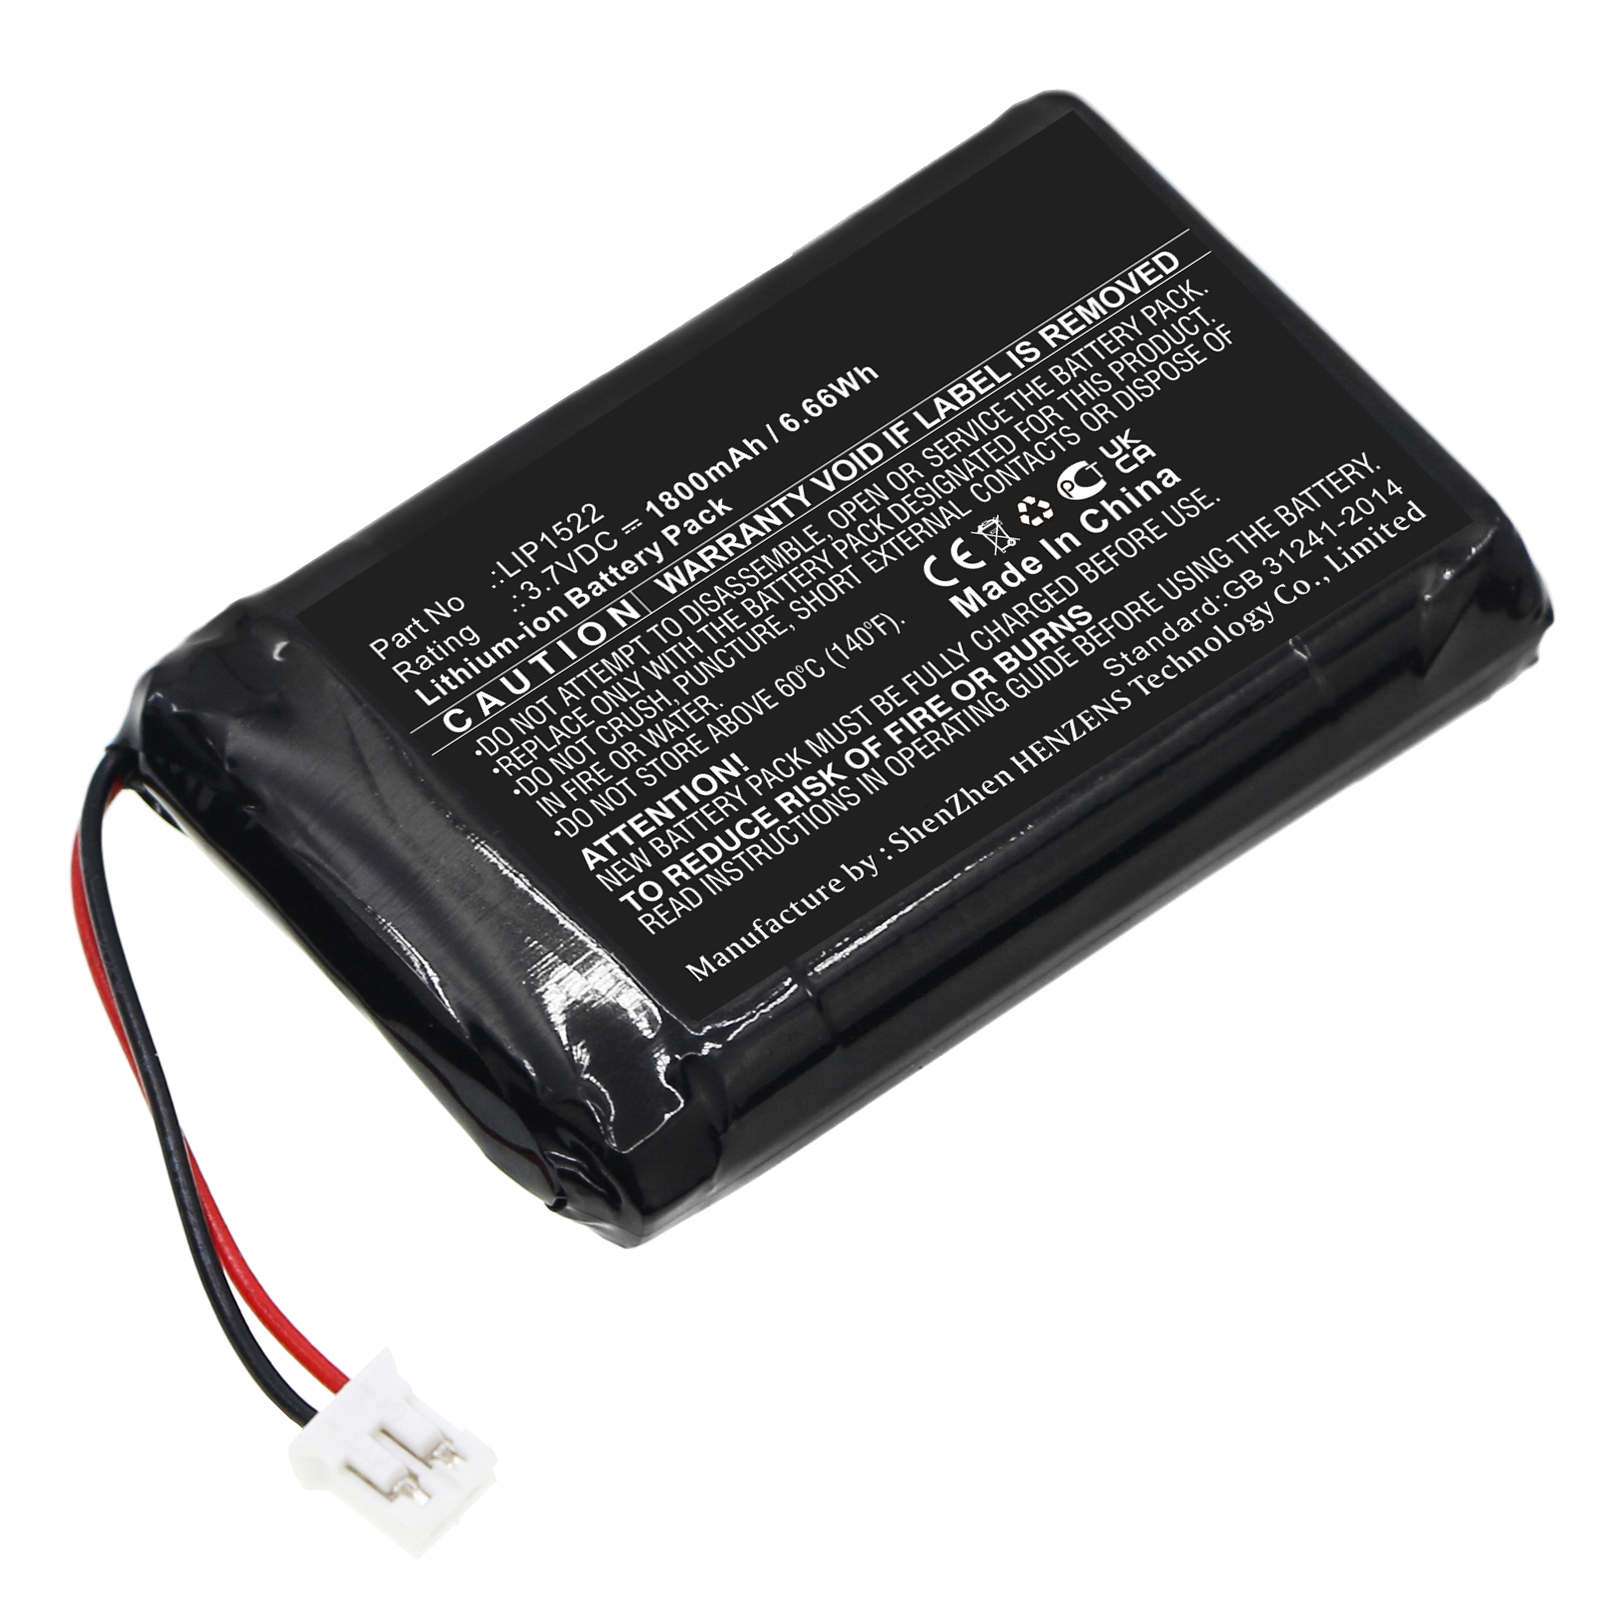 Synergy Digital Game Console Battery, Compatible with Sony LIP1522-2J Game Console Battery (Li-ion, 3.7V, 1800mAh)